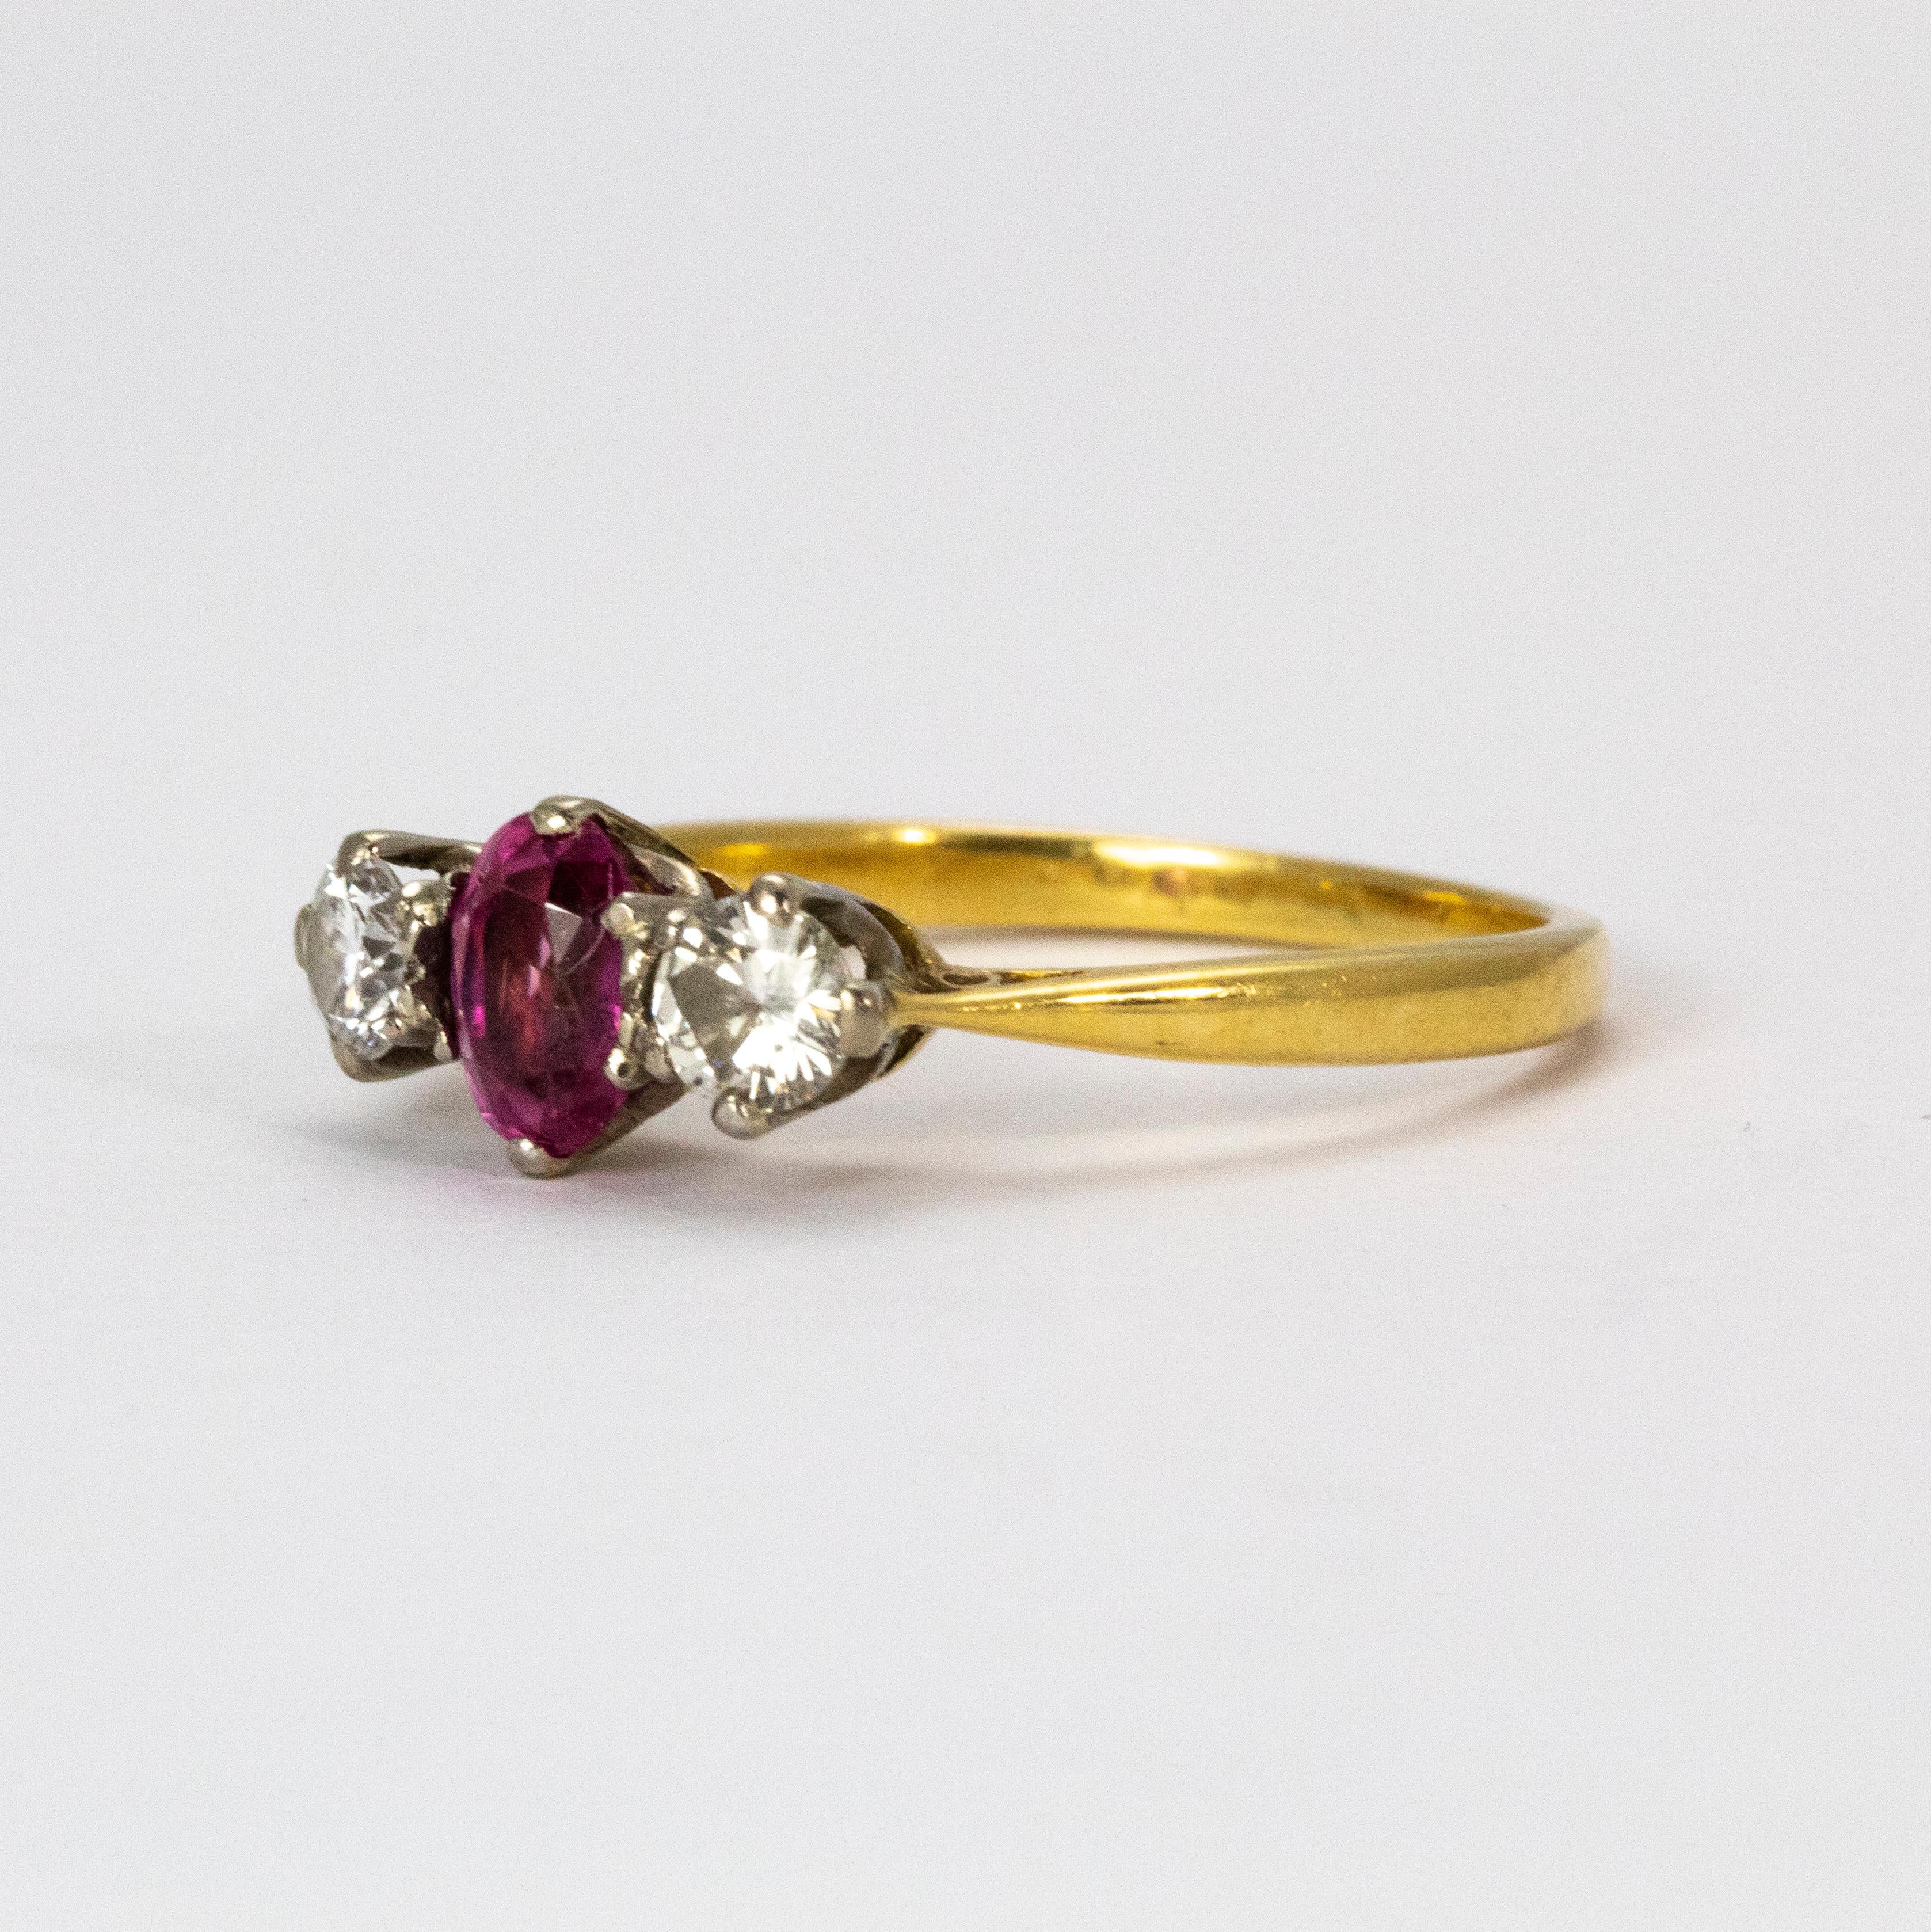 A gorgeous vintage three-stone ring. The wonderful central ruby weights 30 points, and on either flank sits a bright white diamond each weighing 25 points. Modelled in 18 Karat yellow gold, with platinum claw settings around each stone.

Ring Size: